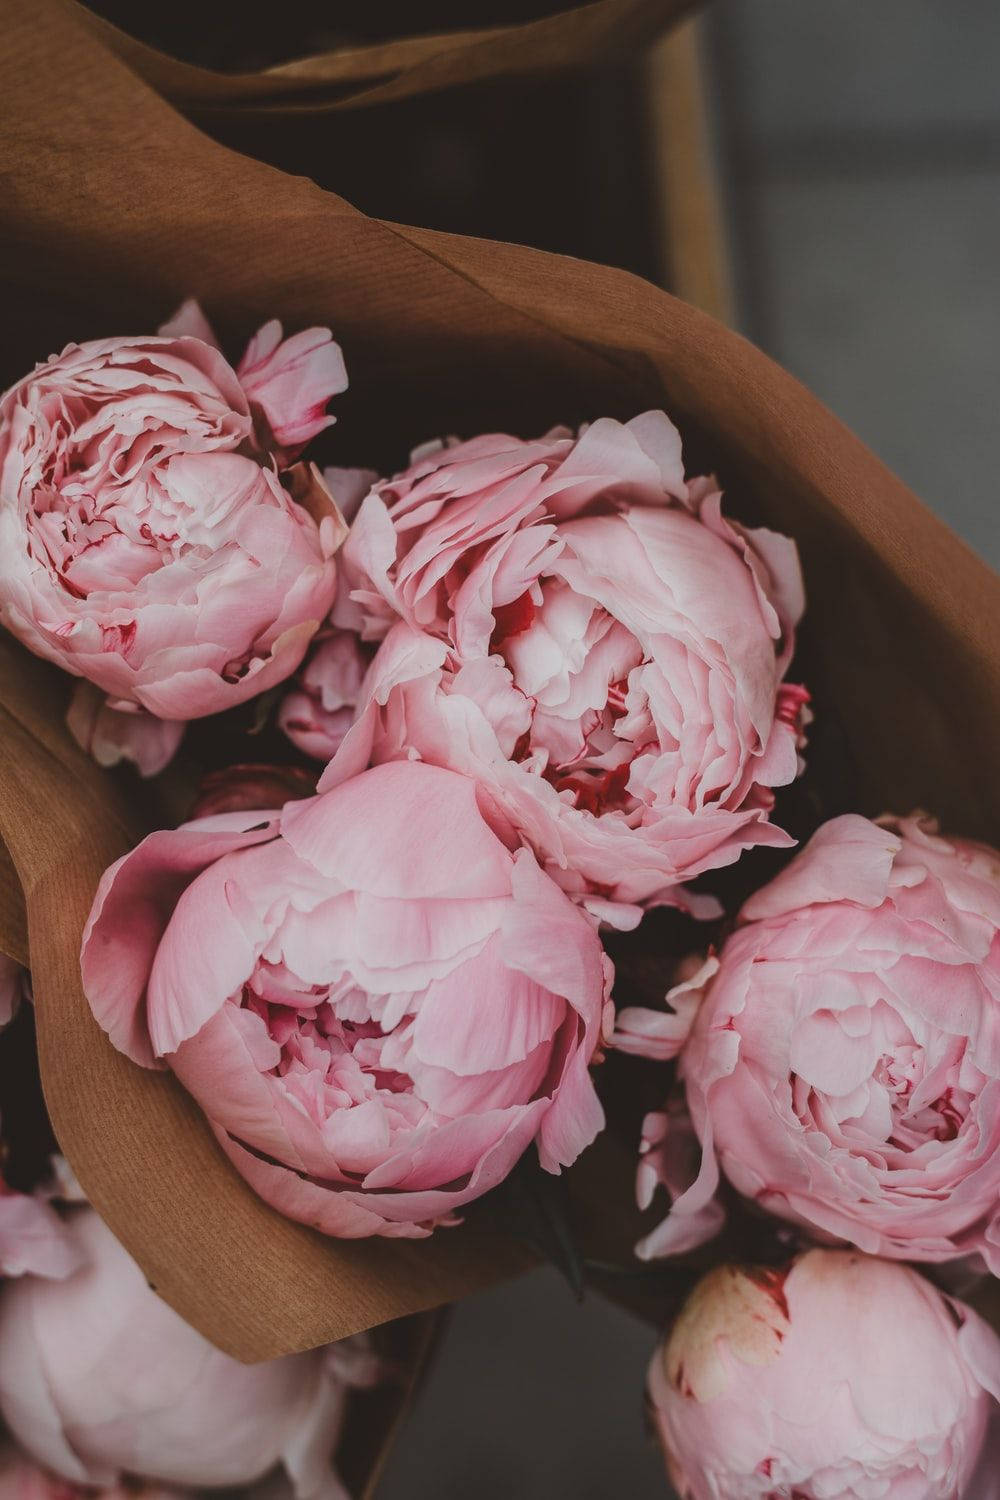 Caption: "Glorious Pink Peony Bouquet Wrapped in Brown Paper" Wallpaper